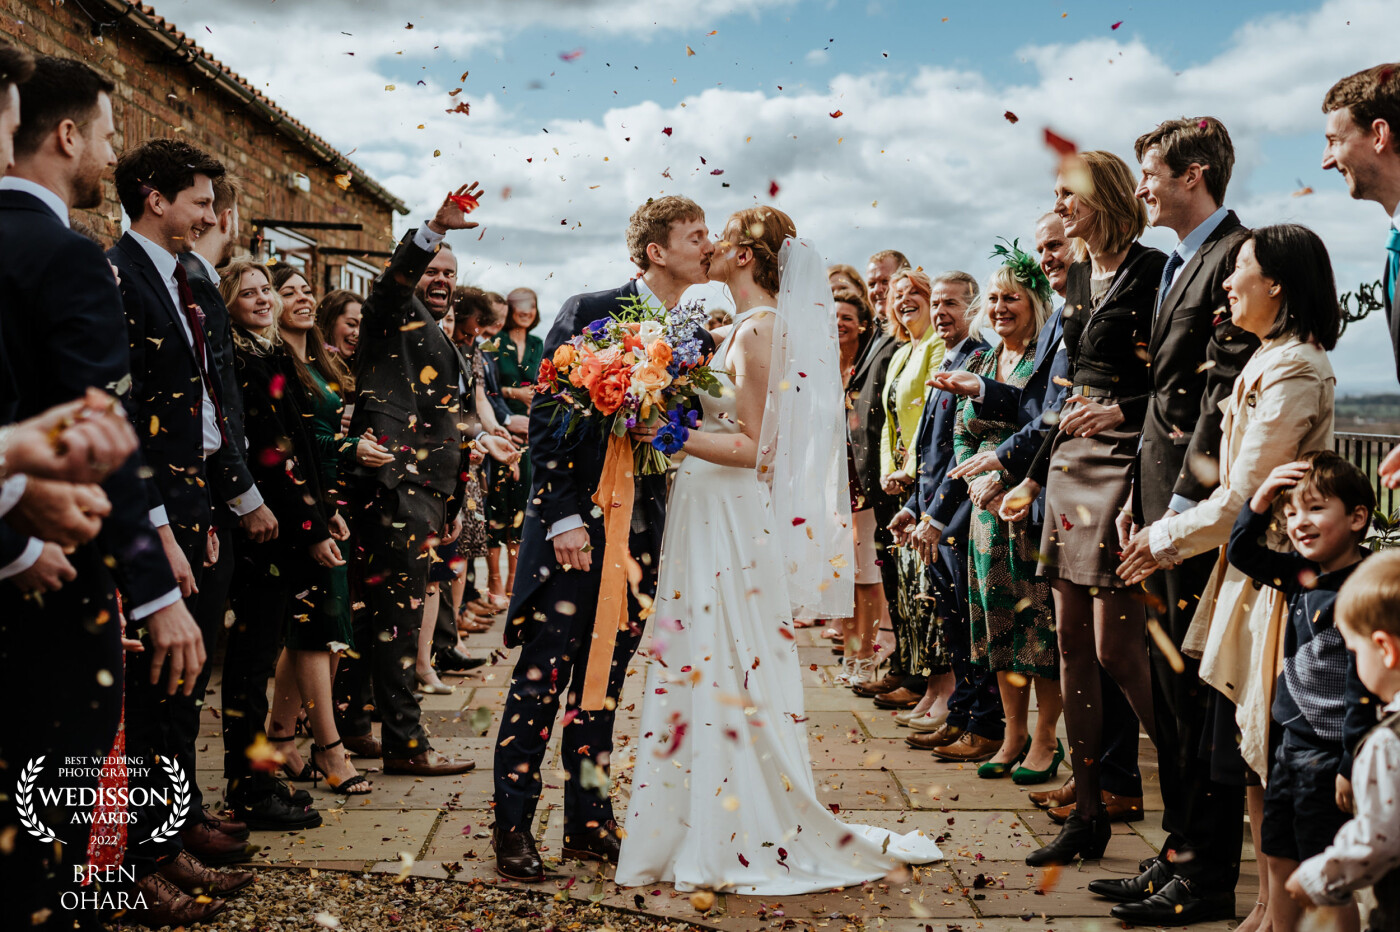 Taken at Thief Hall in North Yorkshire. I asked the couple to stop halfway down the two lines and have a quick kiss. The idea and the photo turned out well. The family had dried flowers for several months to create the lovely confetti.